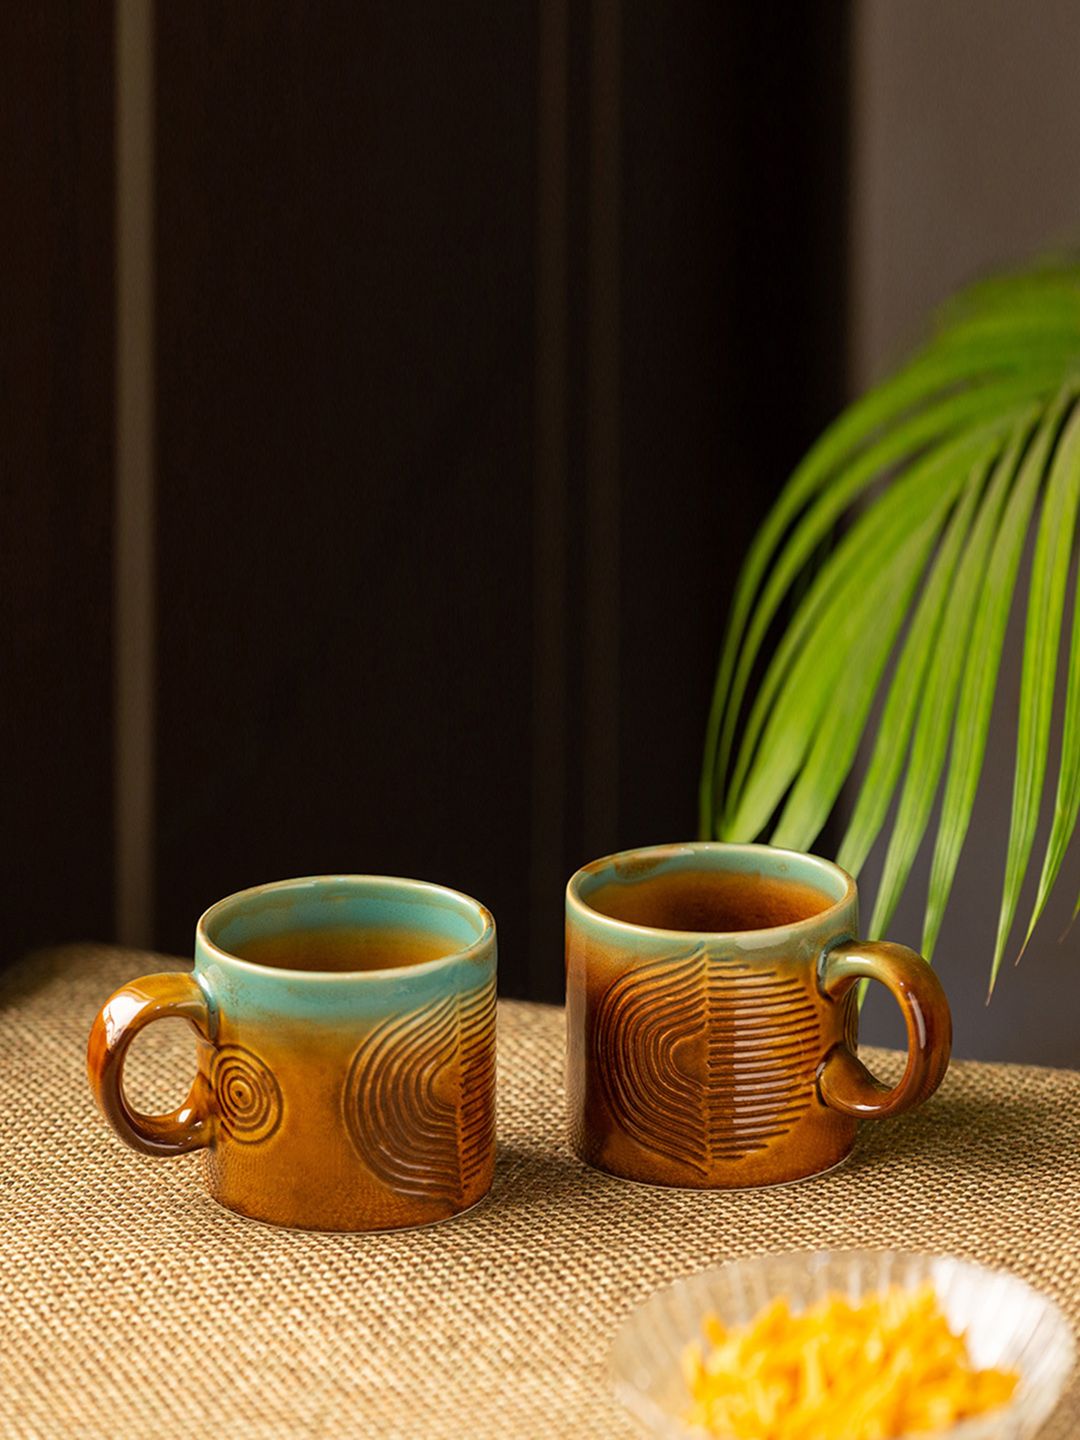 ExclusiveLane Set of 2 Brown & Sea Green Hand-Engraved Ceramic Coffee Mugs Price in India